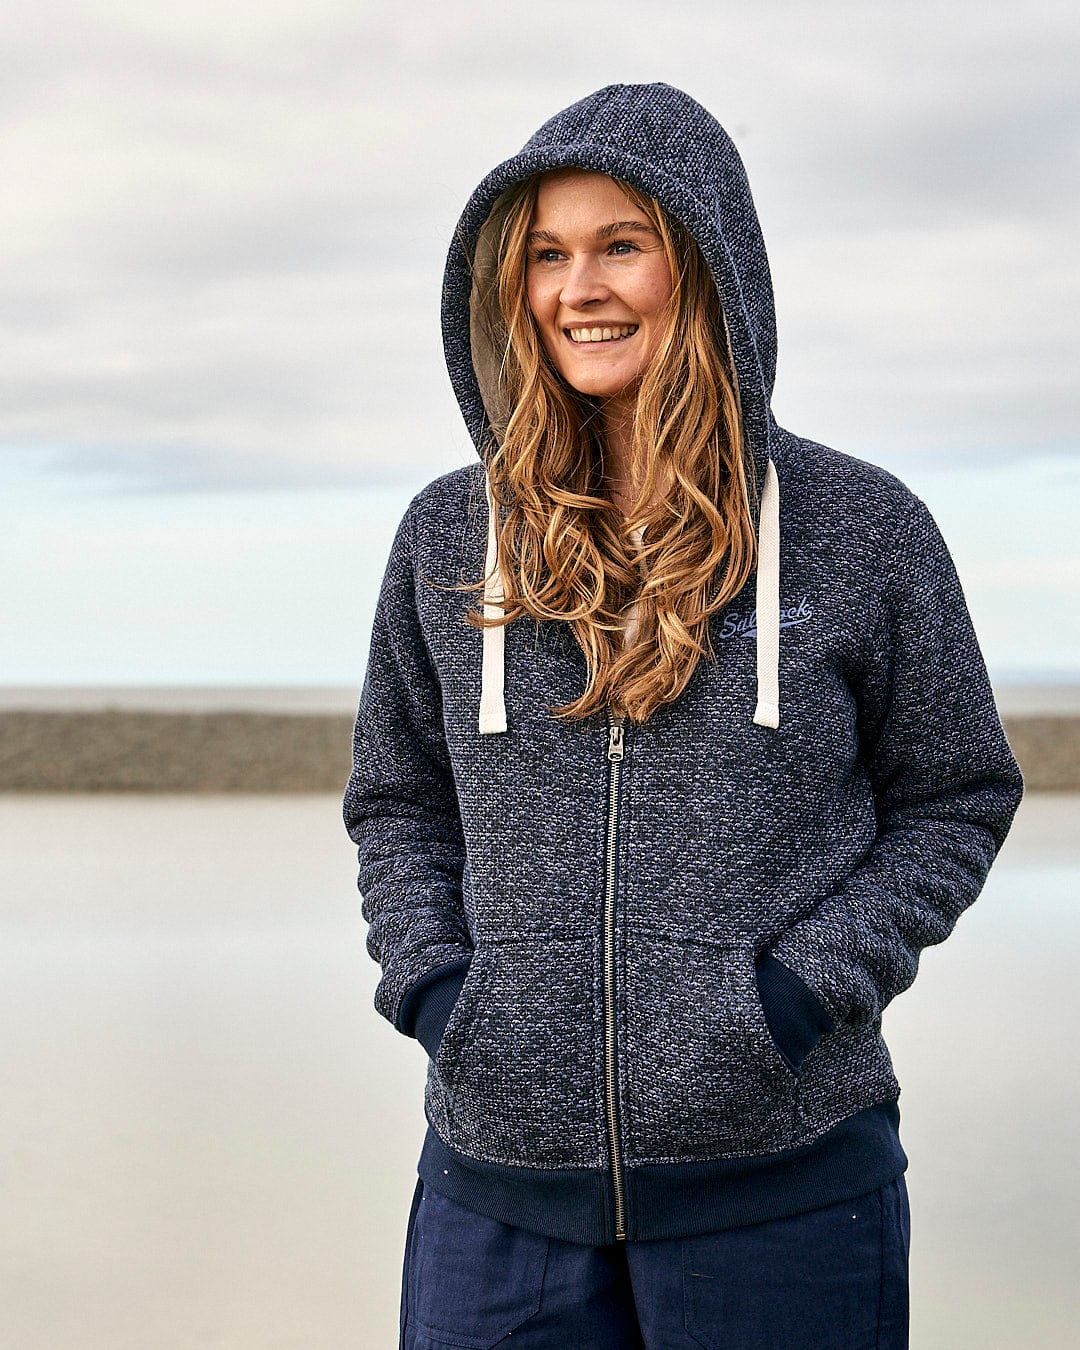 A young woman wearing a Saltrock Jazz - Womens Borg Lined Zip Hoodie - Dark Blue and jeans on the beach.